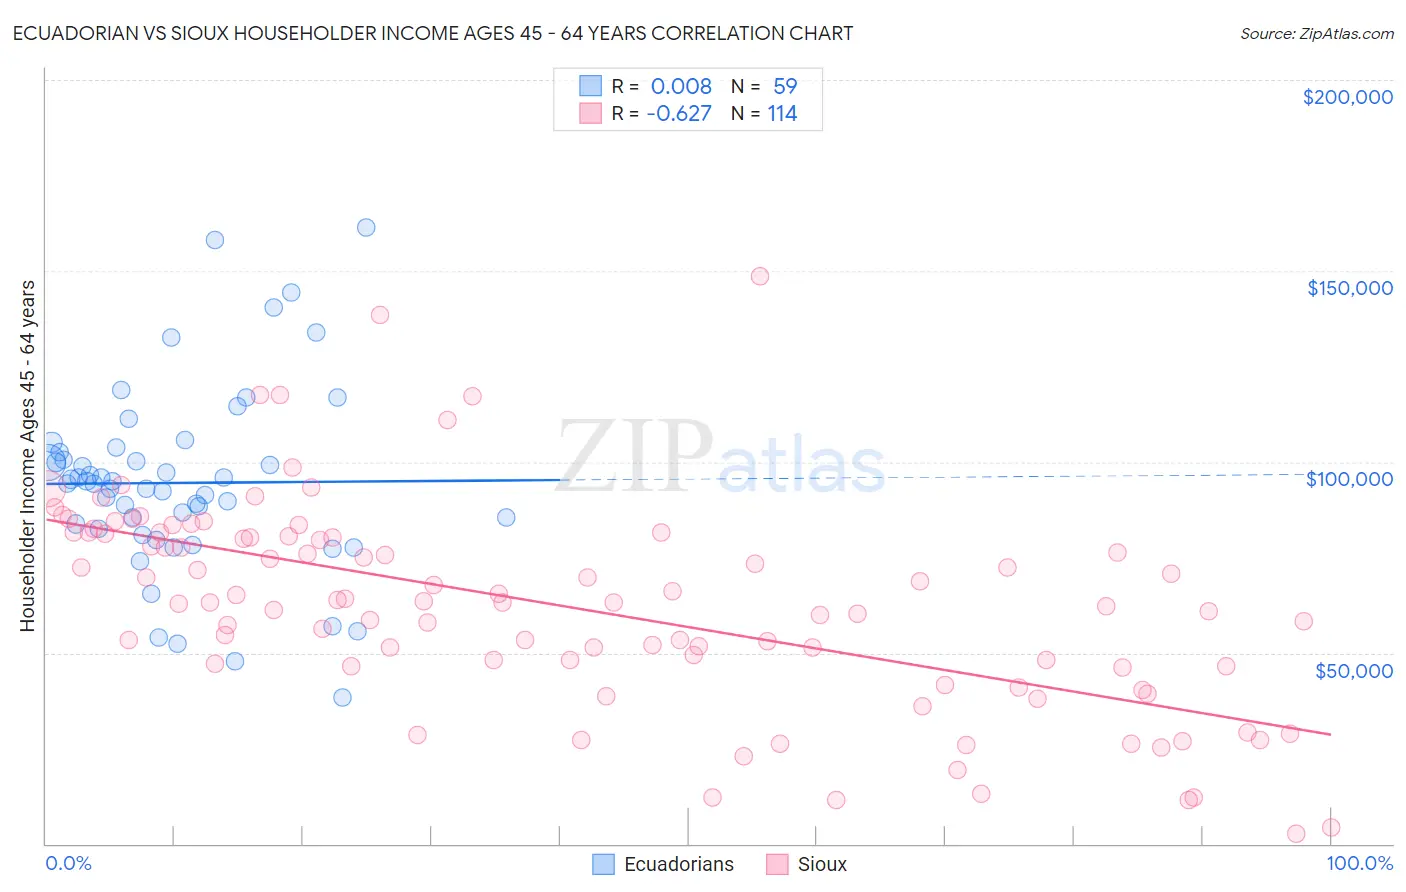 Ecuadorian vs Sioux Householder Income Ages 45 - 64 years